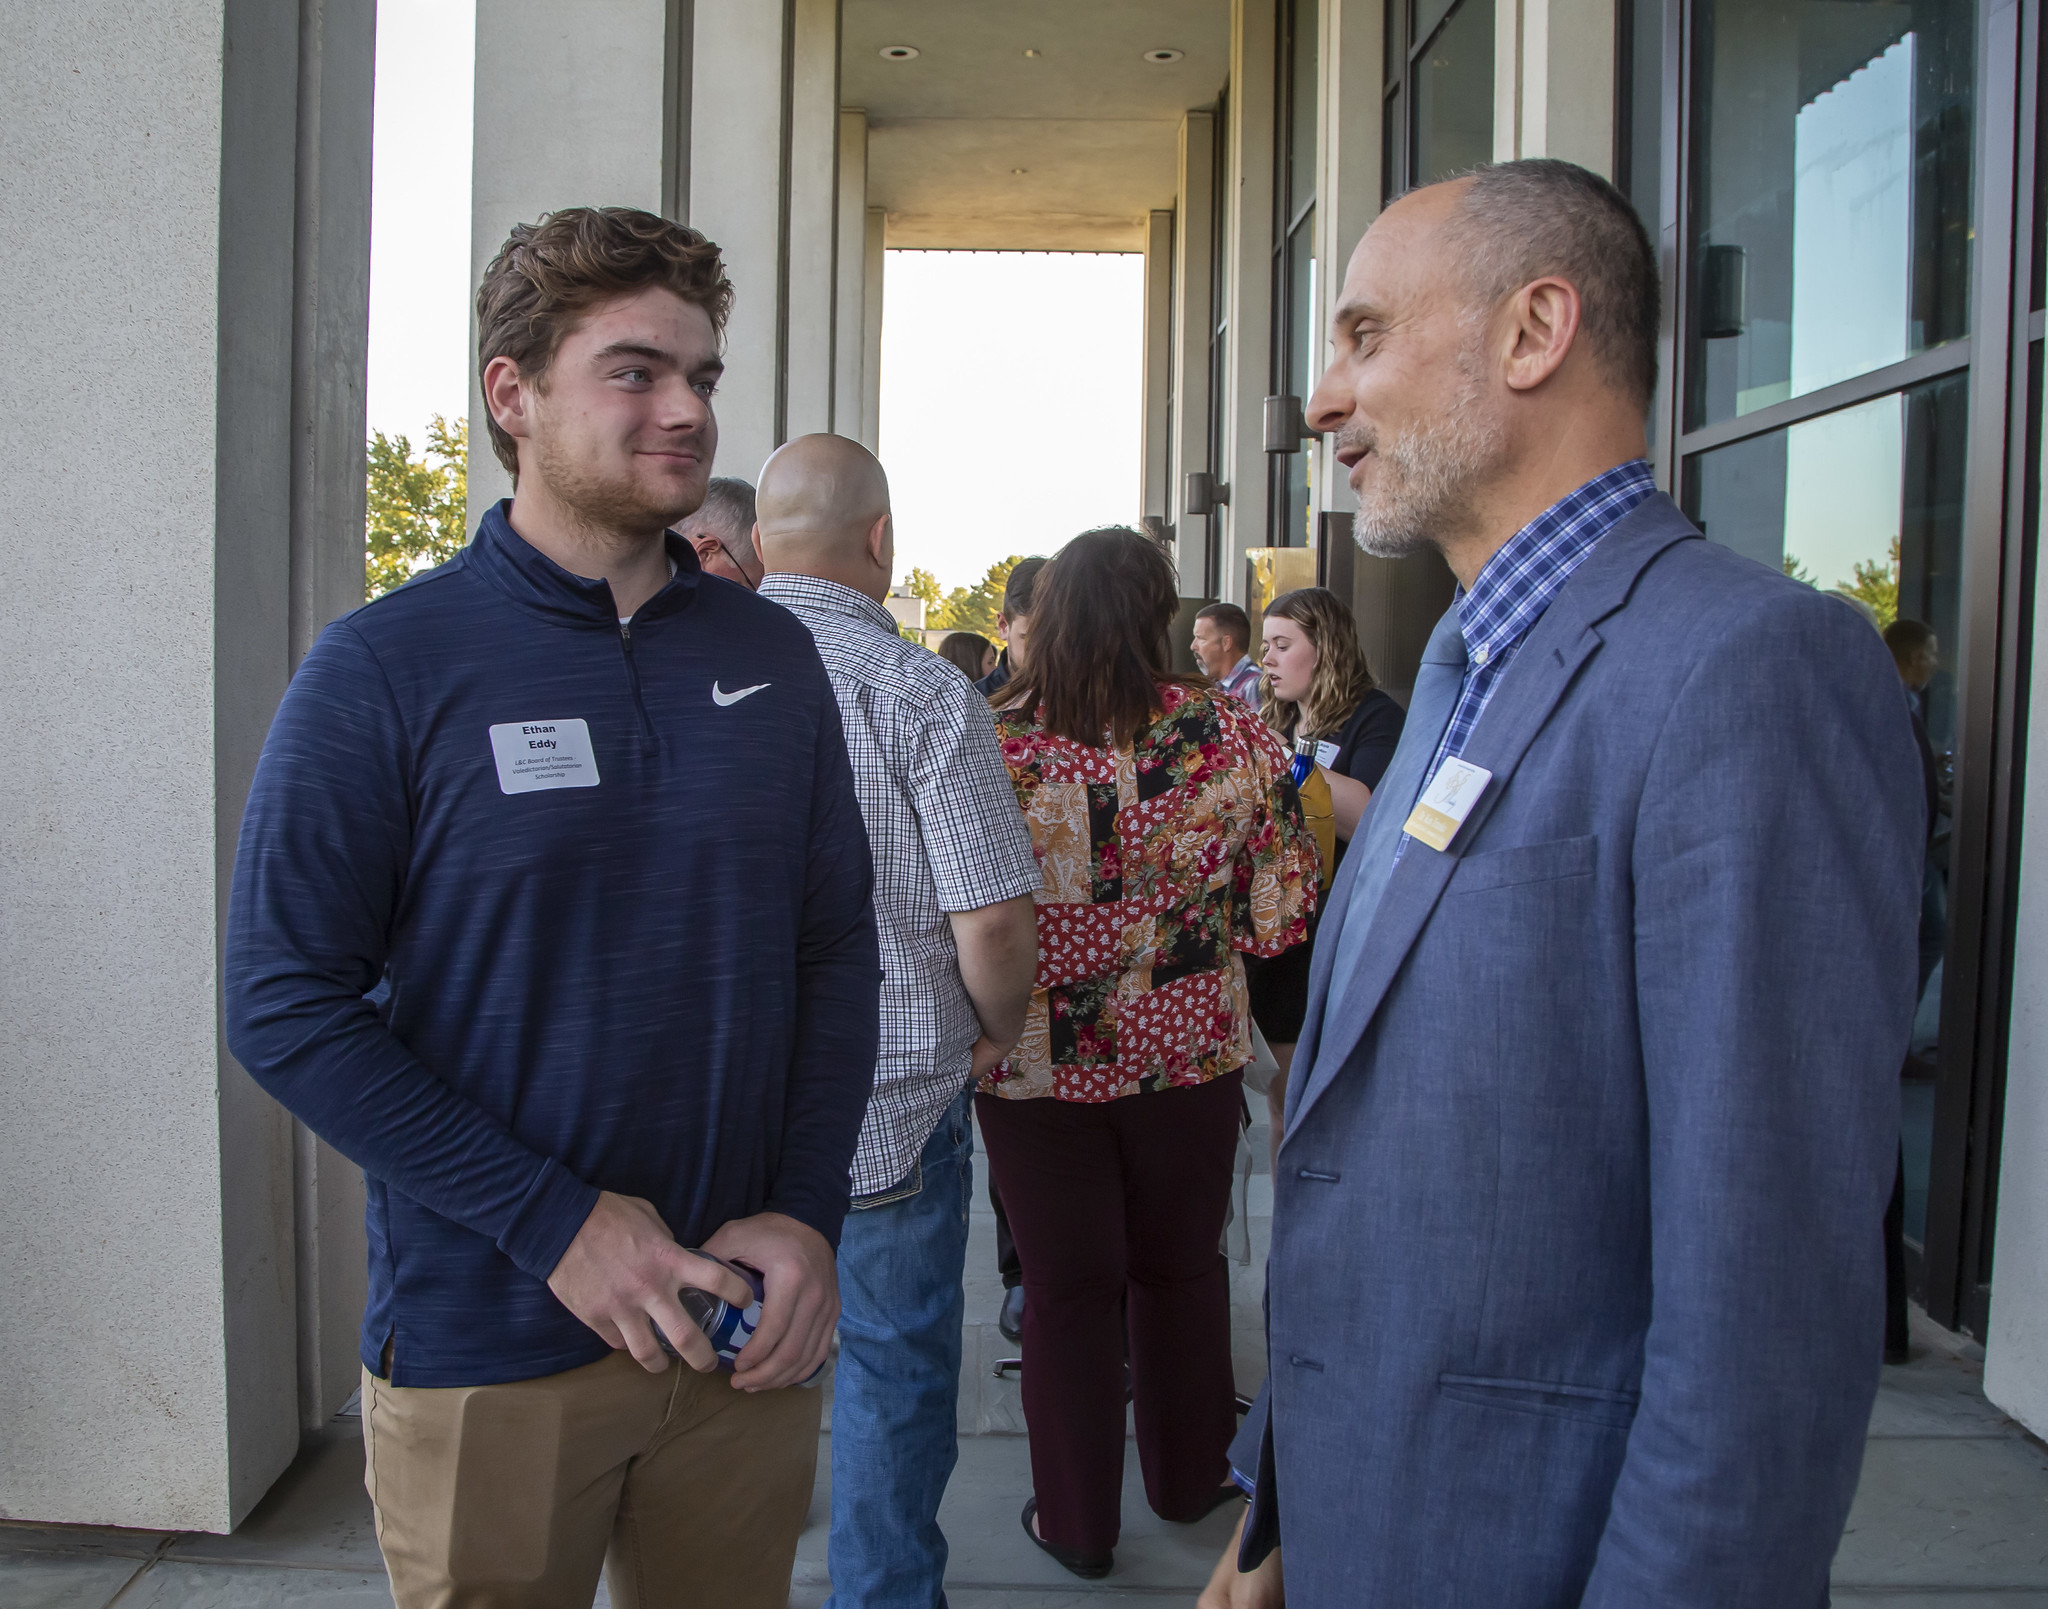 Lewis and Clark Community College's scholarship winners got the opportunity to meet their benefactors on Thursday, Oct. 6, at the annual Scholars and Donors event. Photo by Jan Dona, L&C Marketing/PR.